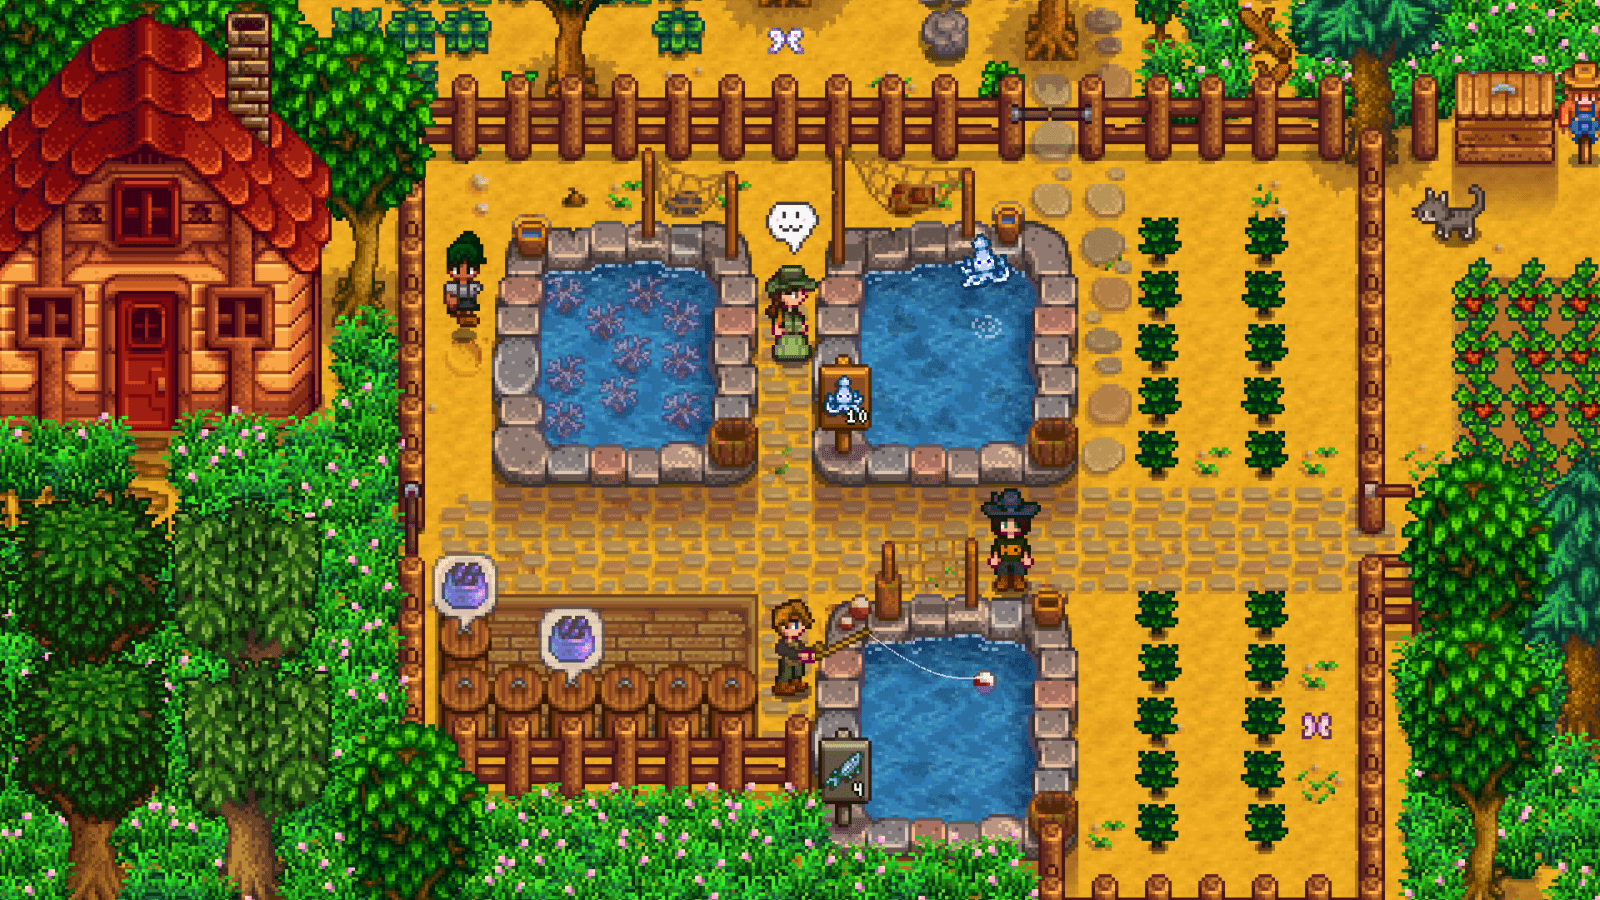 Best Fish Pond Stardew Valley Stardew valley fish pond guide: everything you need to know